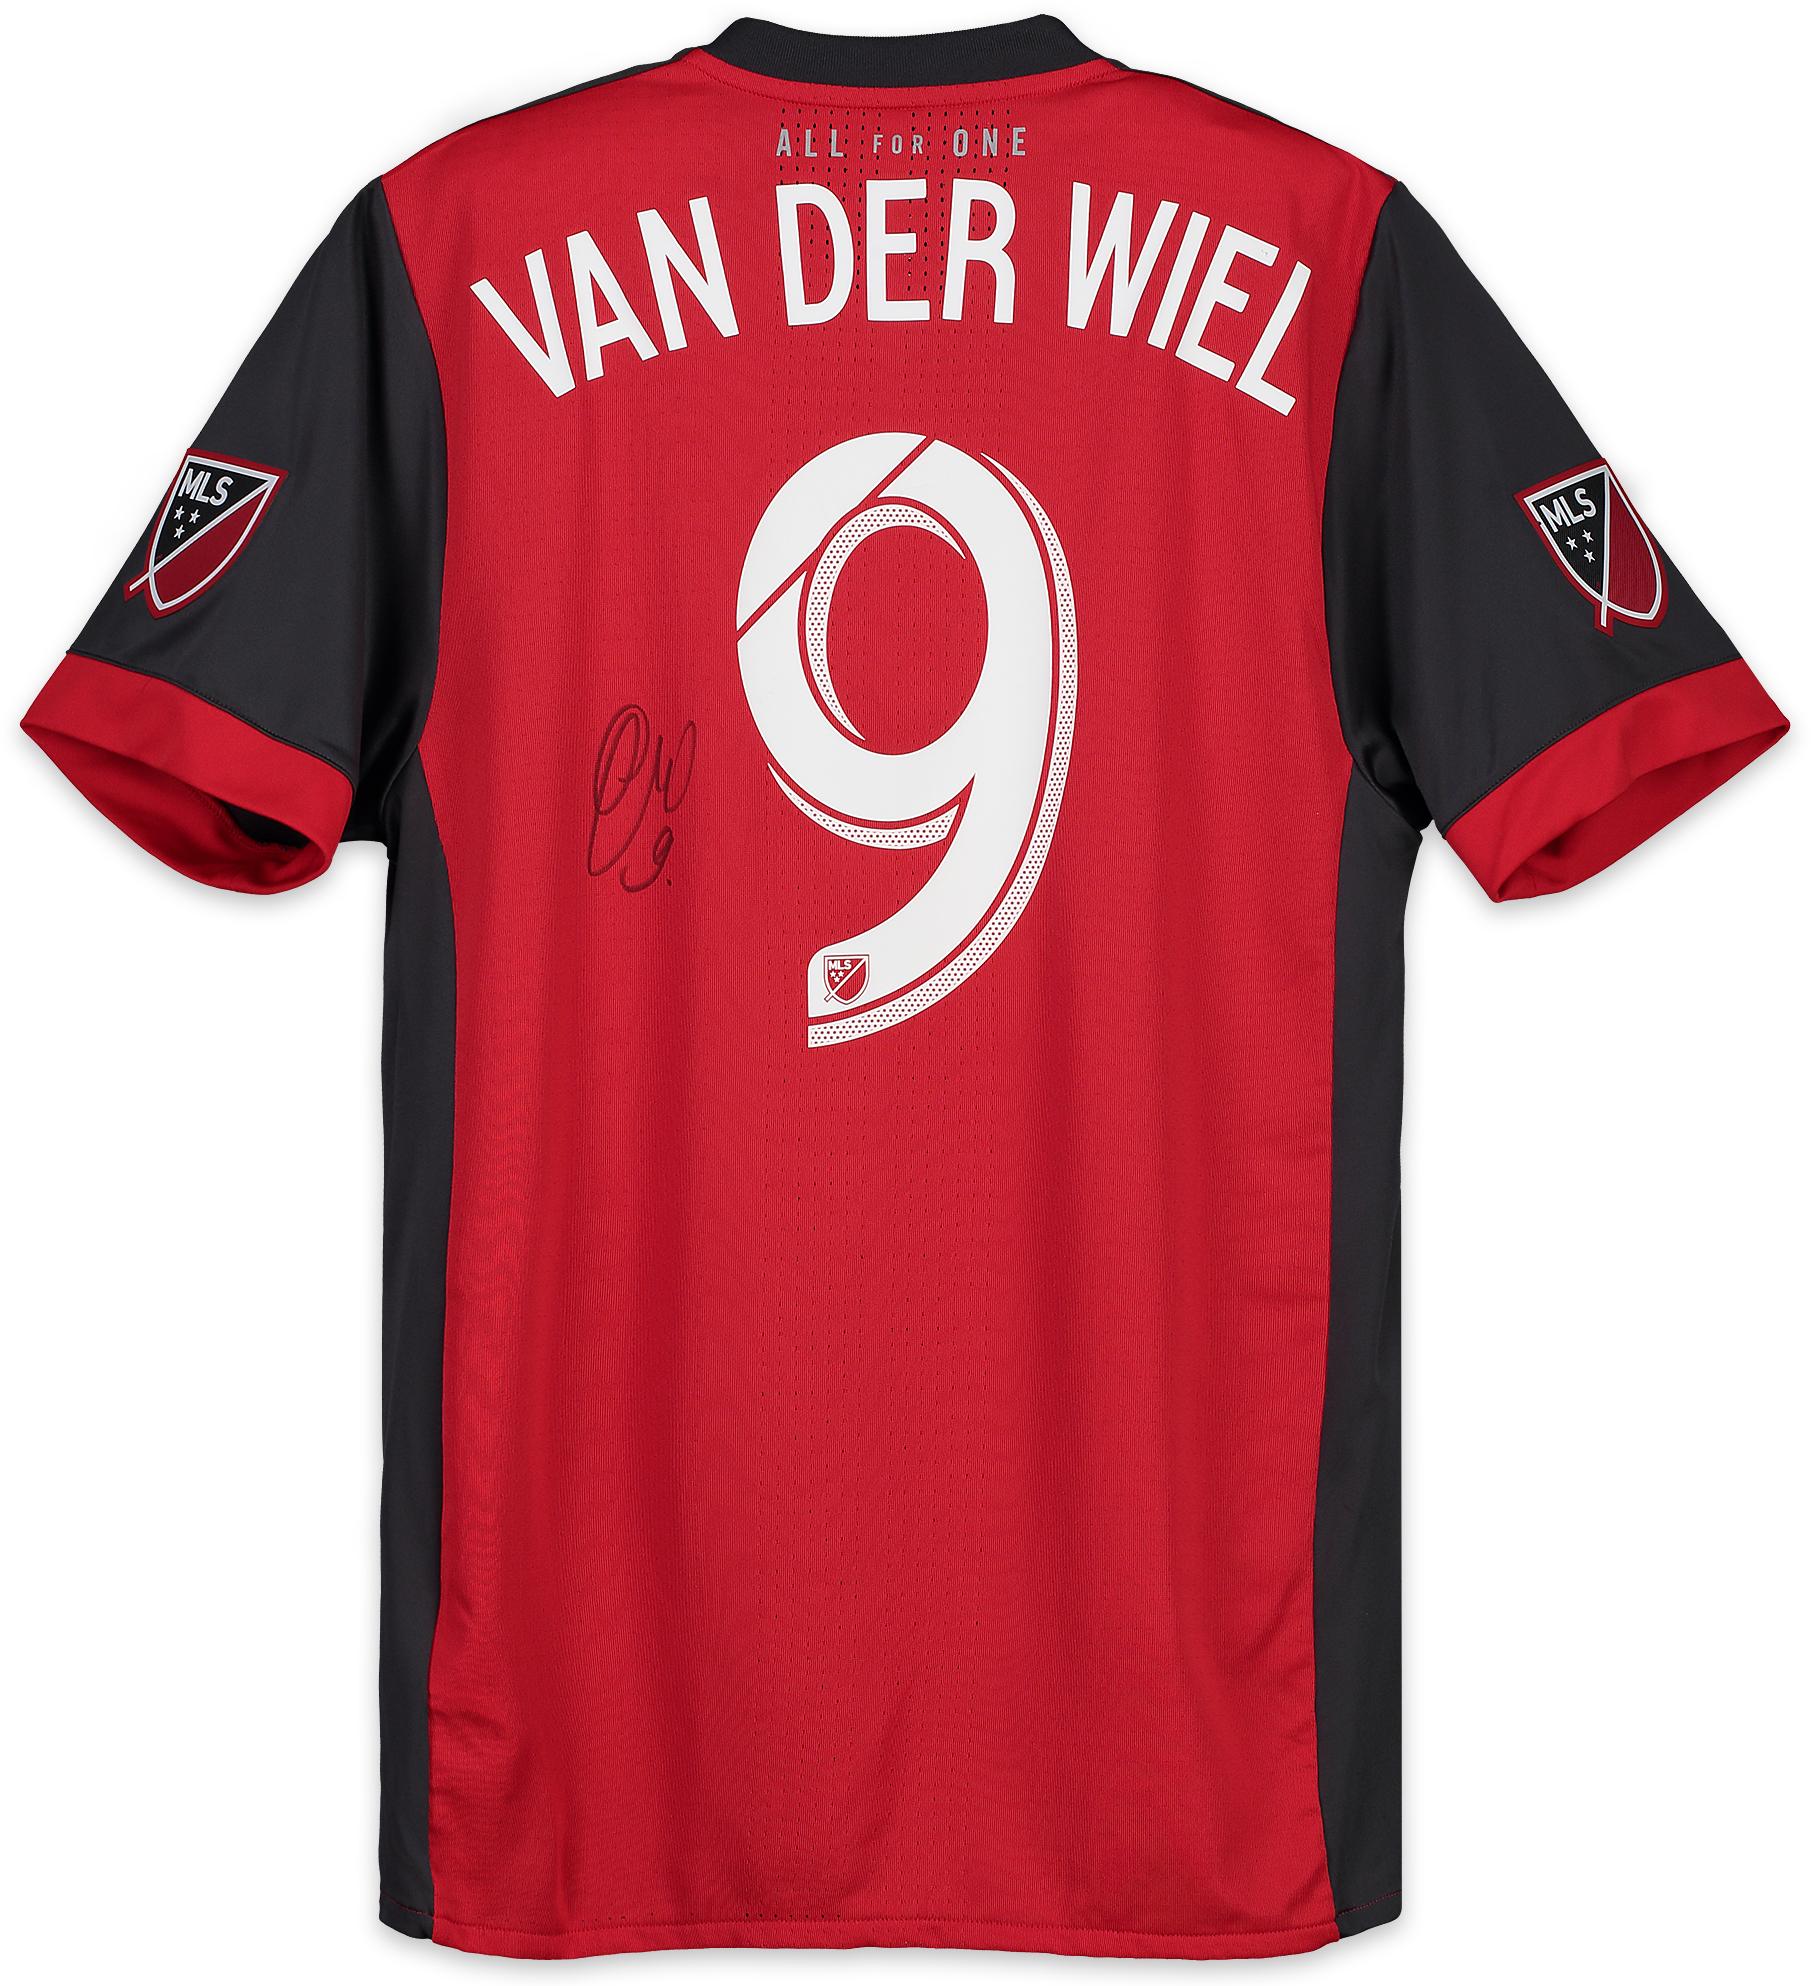 Gregory van der Weil Toronto FC Autographed Match-Used Red #9 Jersey vs. Vancouver Whitecaps on October 6, 2018 - Fanatics Authentic Certified